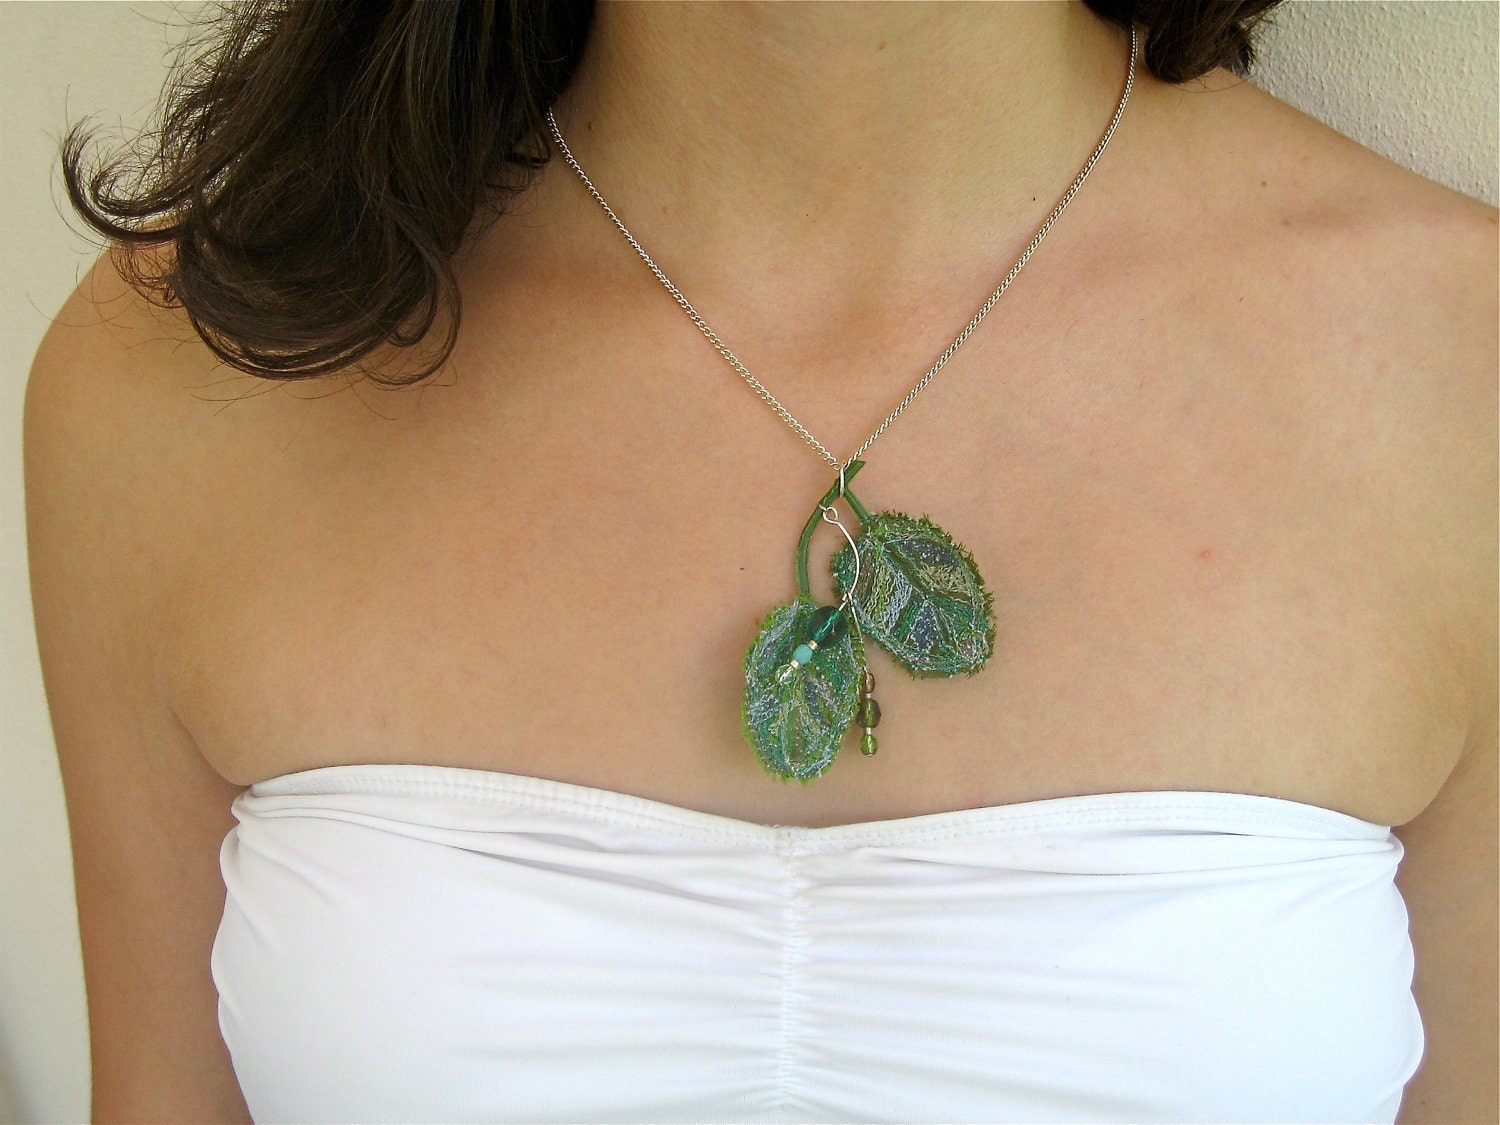 Leaf pendant - green beads embroidery handmade - plastic and textile woodland jewelry - ooak fall necklace - tree plant nature - unique gift